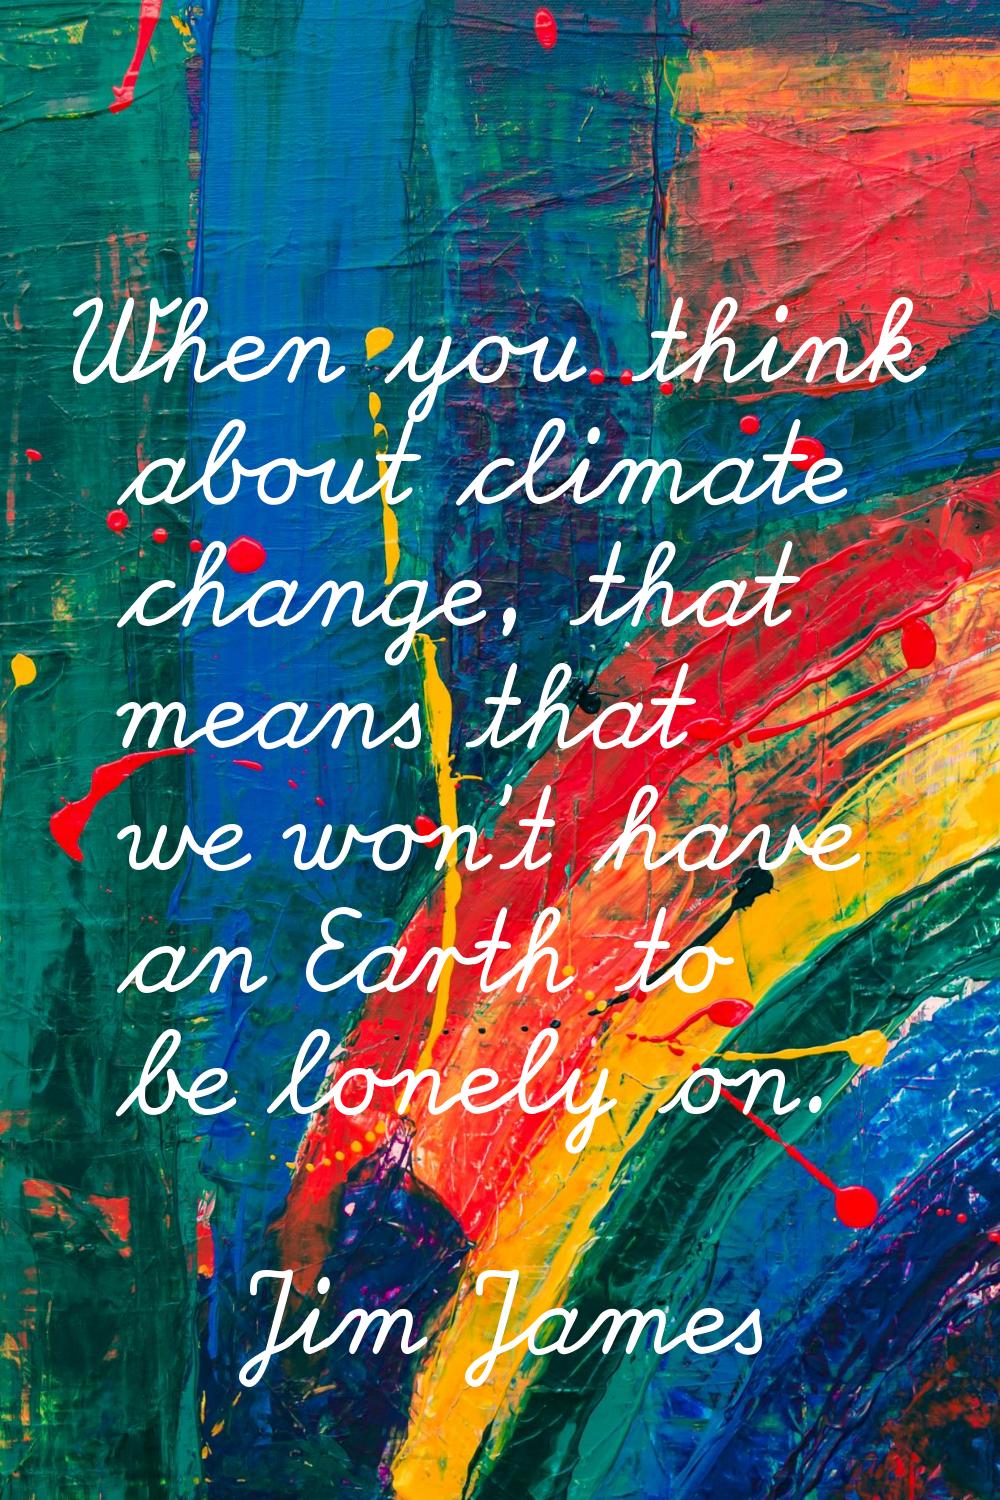 When you think about climate change, that means that we won't have an Earth to be lonely on.